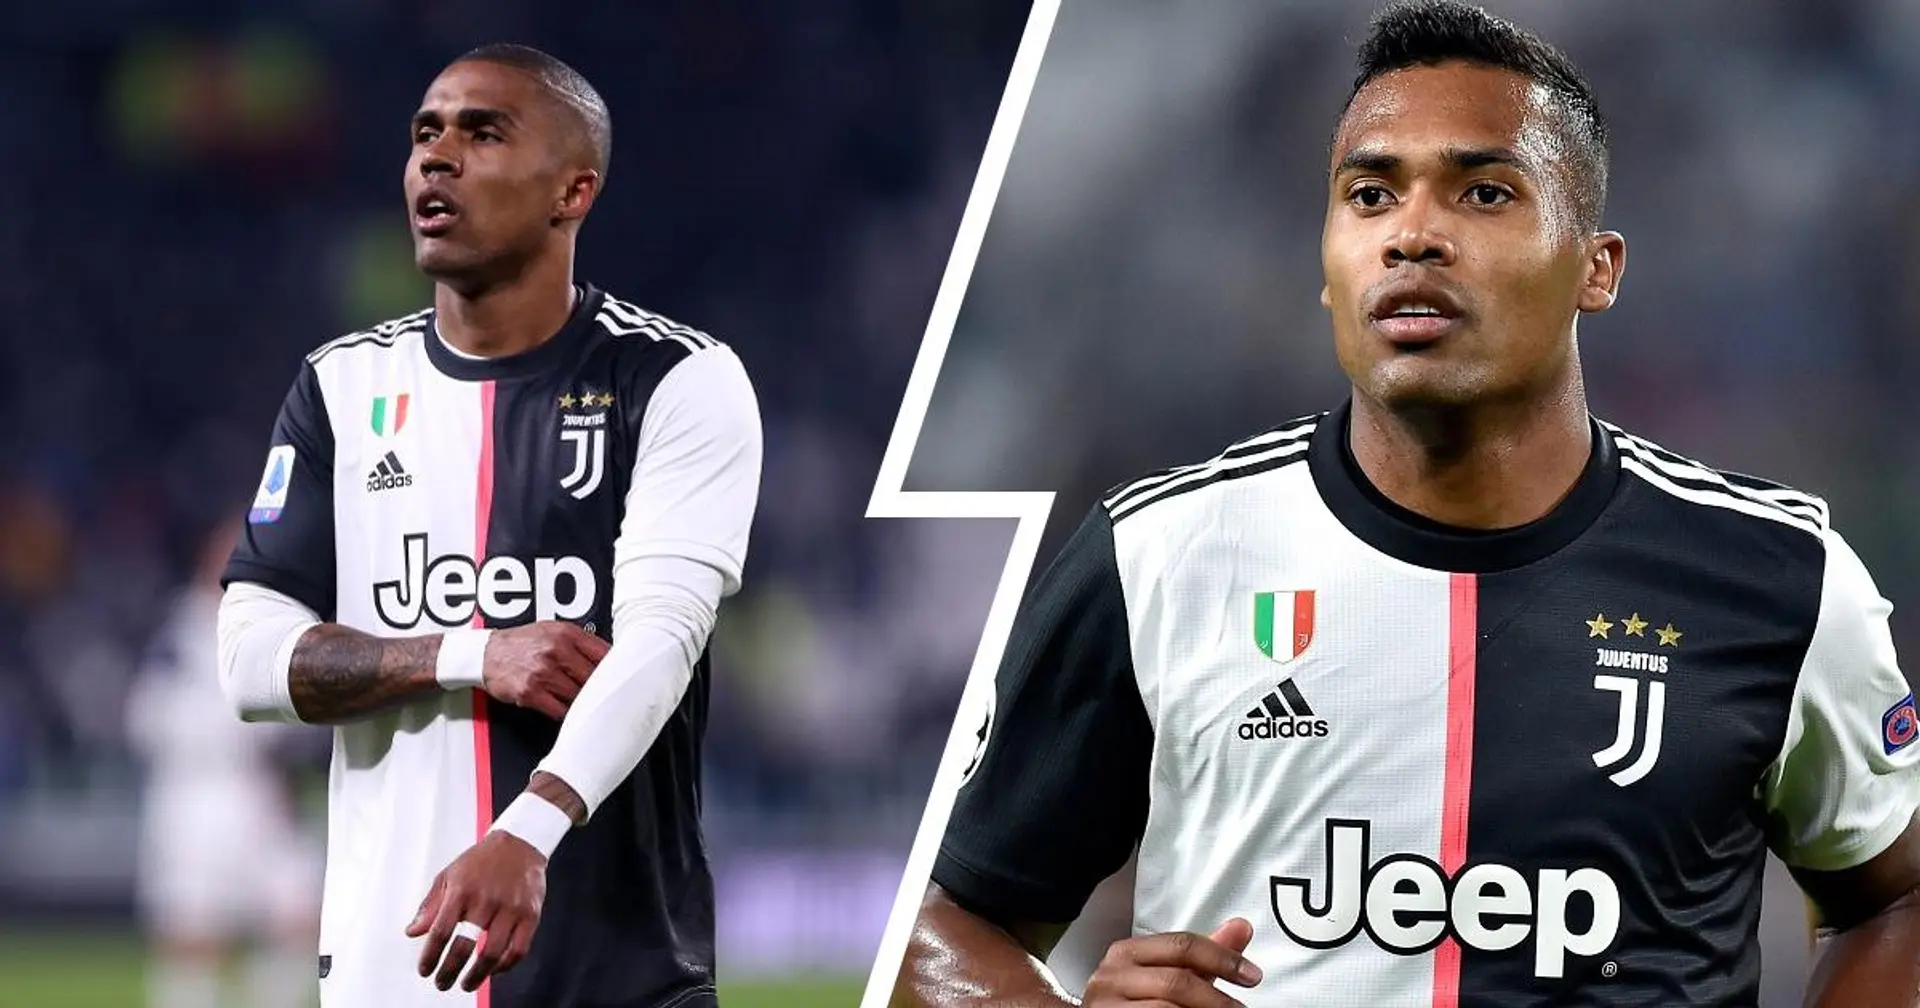 4 transfer opportunities for Real Madrid as Juventus set for overhaul